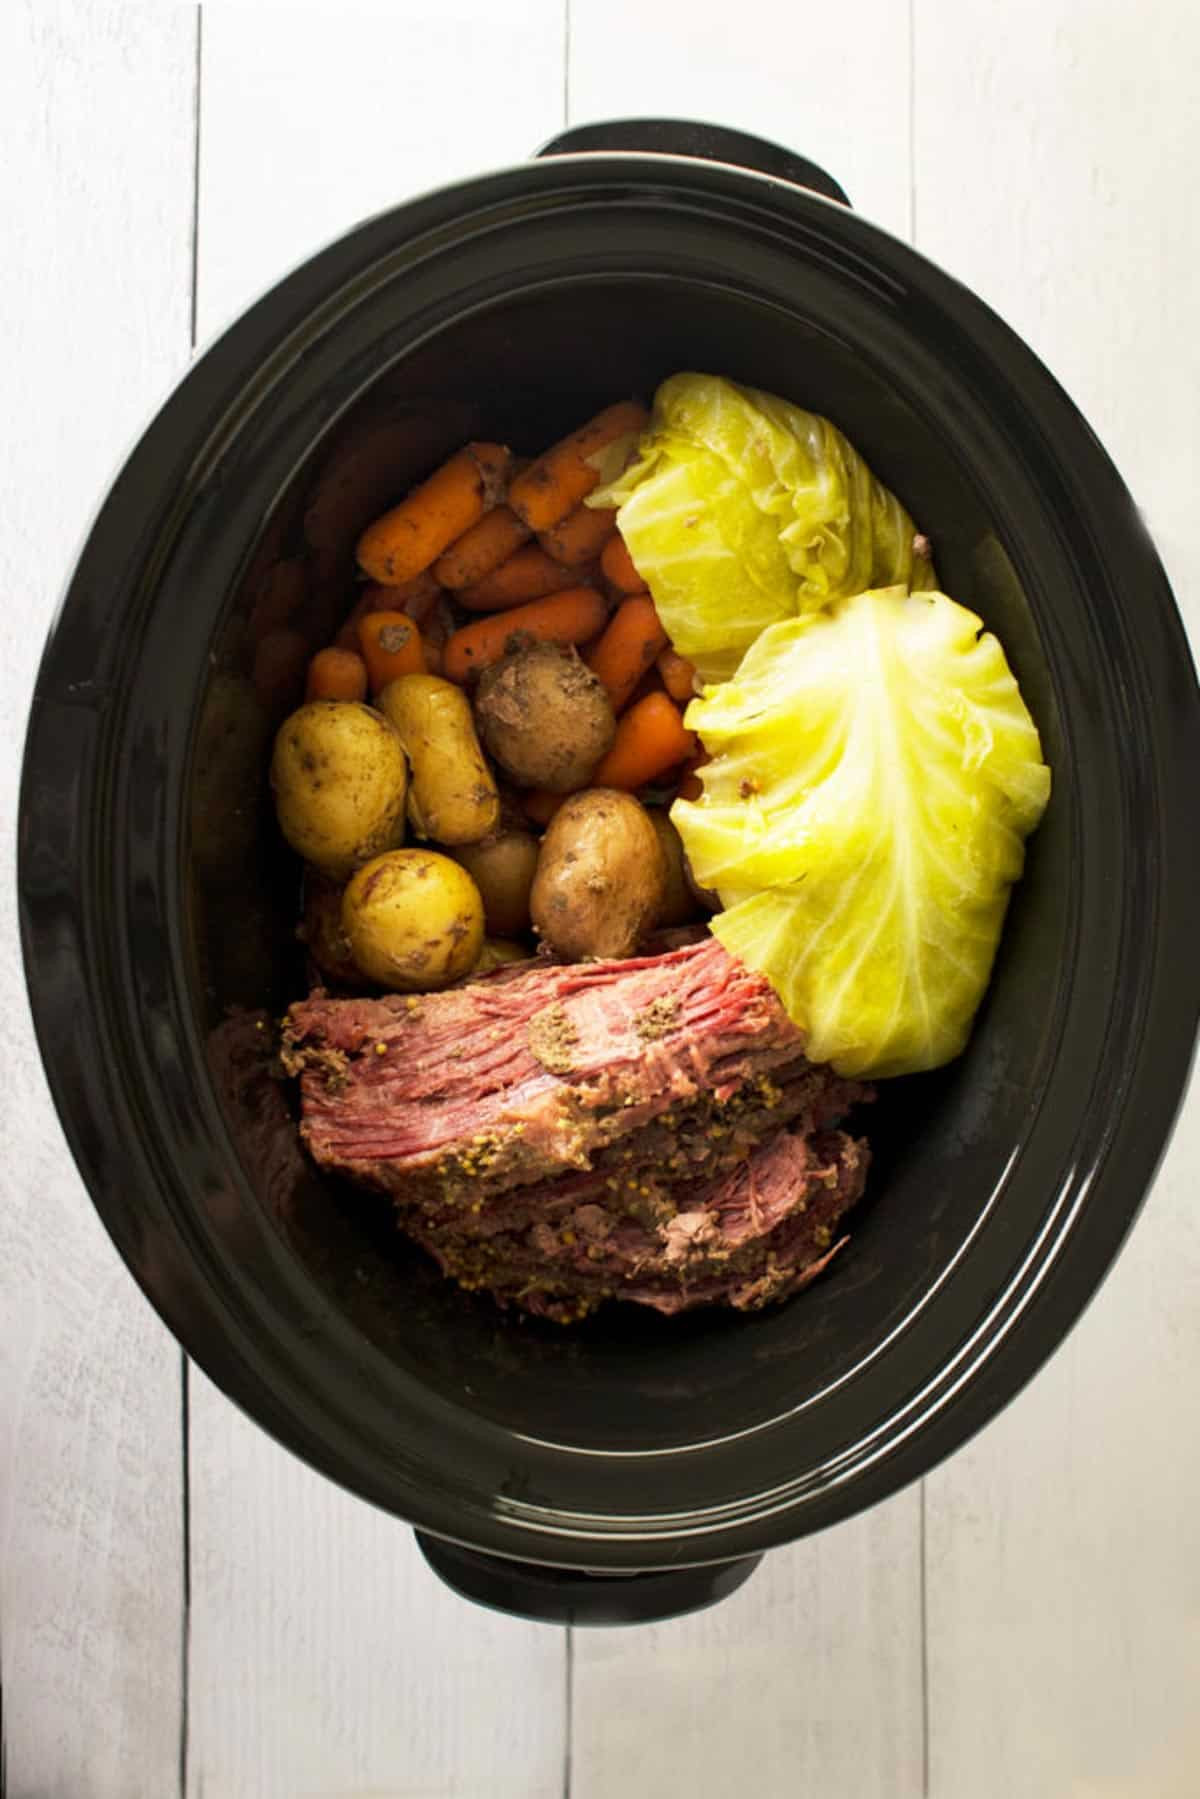 Corned Beef And Cabbage Recipe Crock Pot
 Homemade Corned Beef and Cabbage Crock Pot Recipe